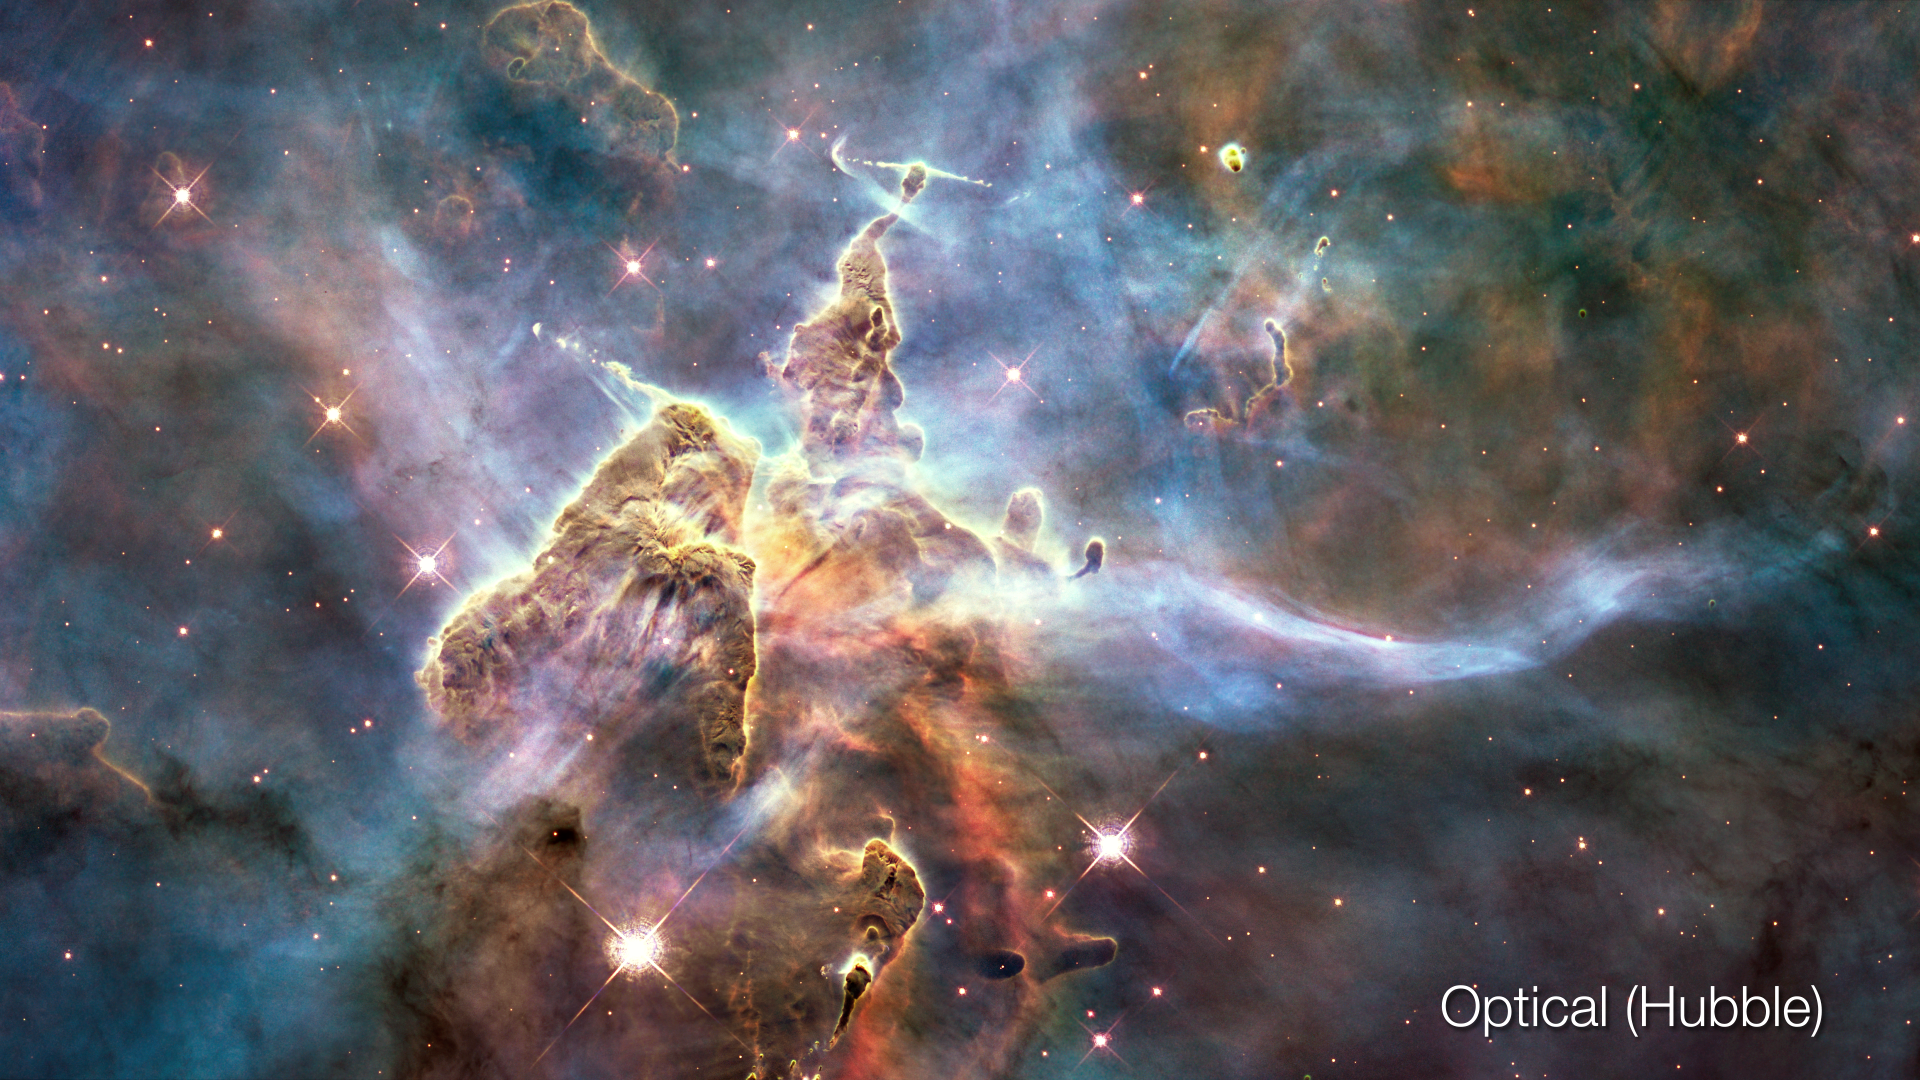 Visible light image of the Pillars in the Carina Nebula.